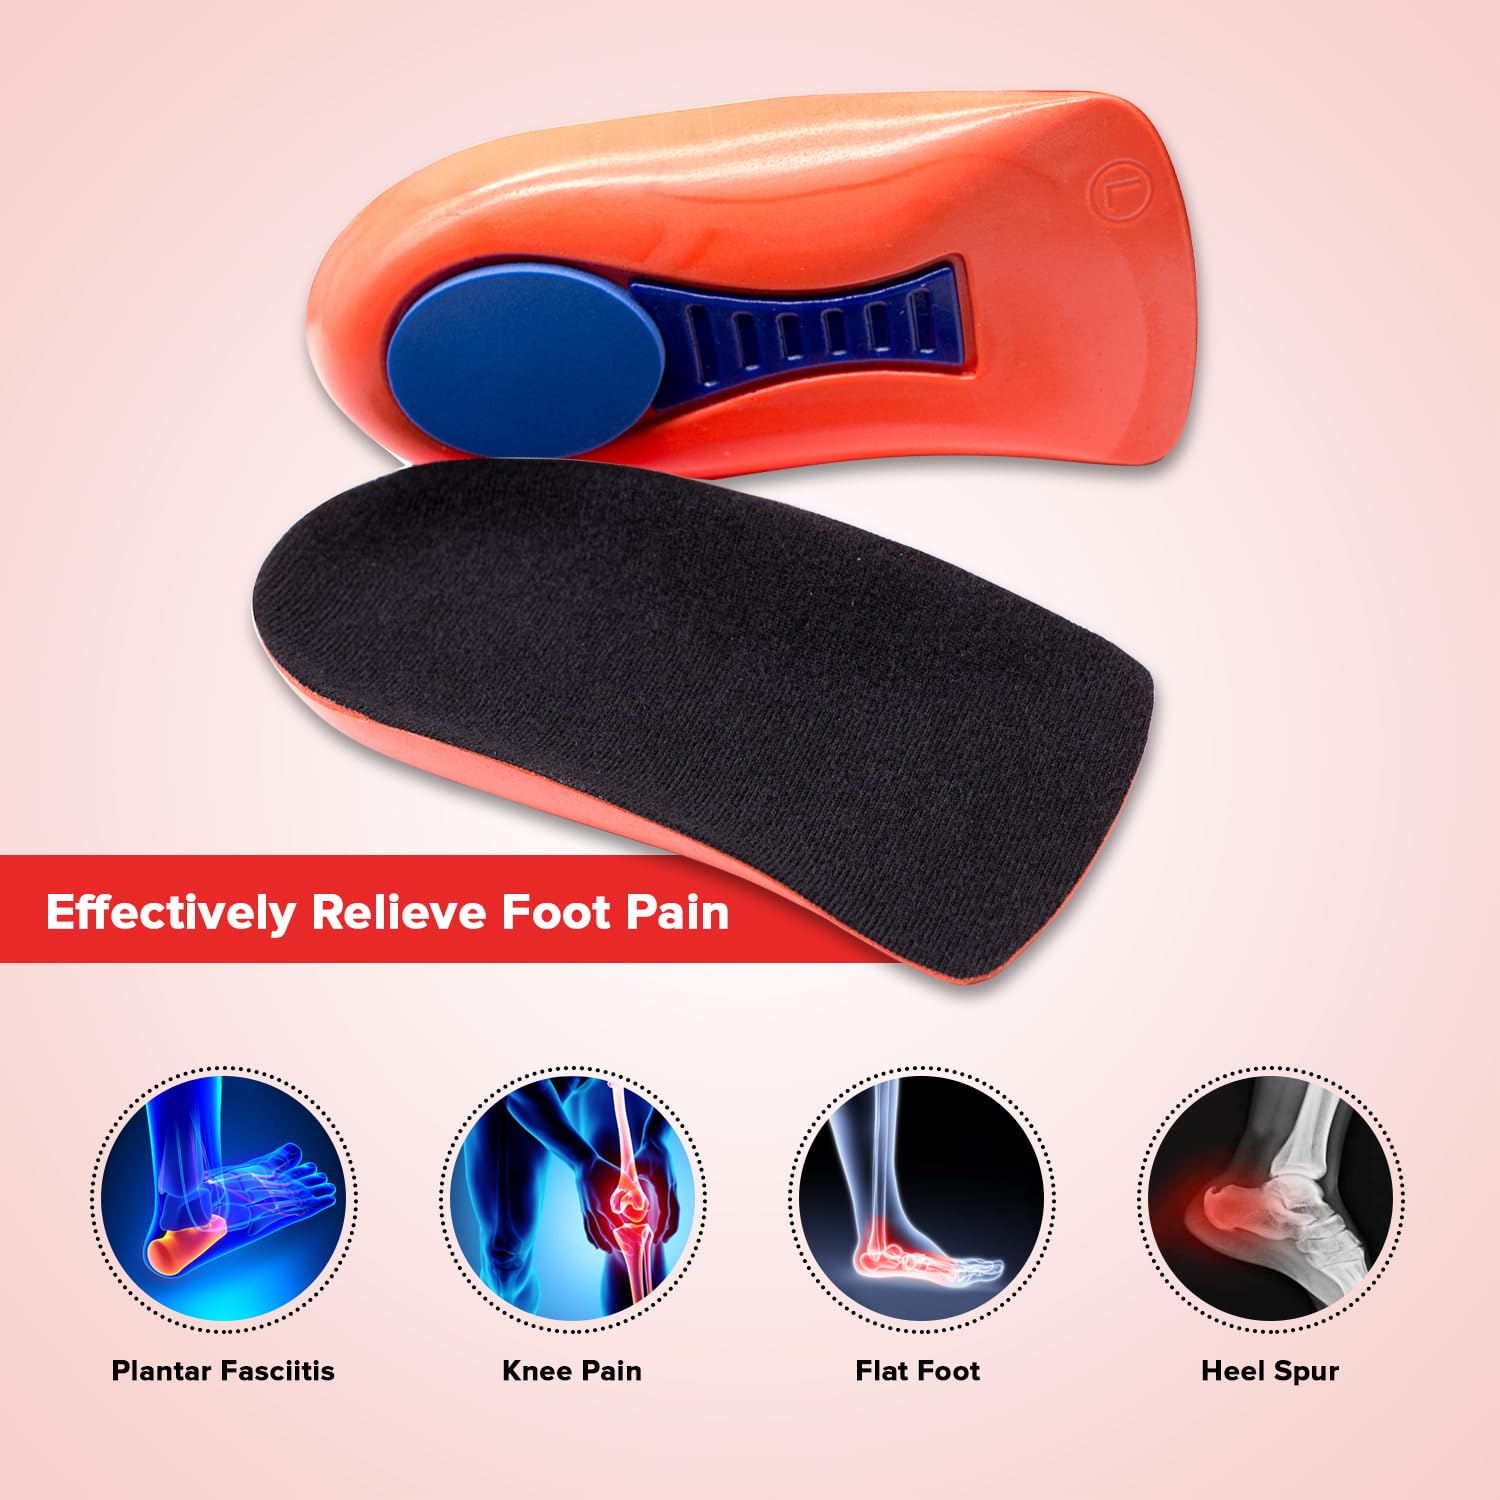 Dr Foot Orthotics Insoles for Arch Pain, Plantar Fasciitis, Heel & Feet Pain Relief | High-Quality PU Insoles with Shock Absorption and Comfort| For Men & Women -1 Pair (Small Size)